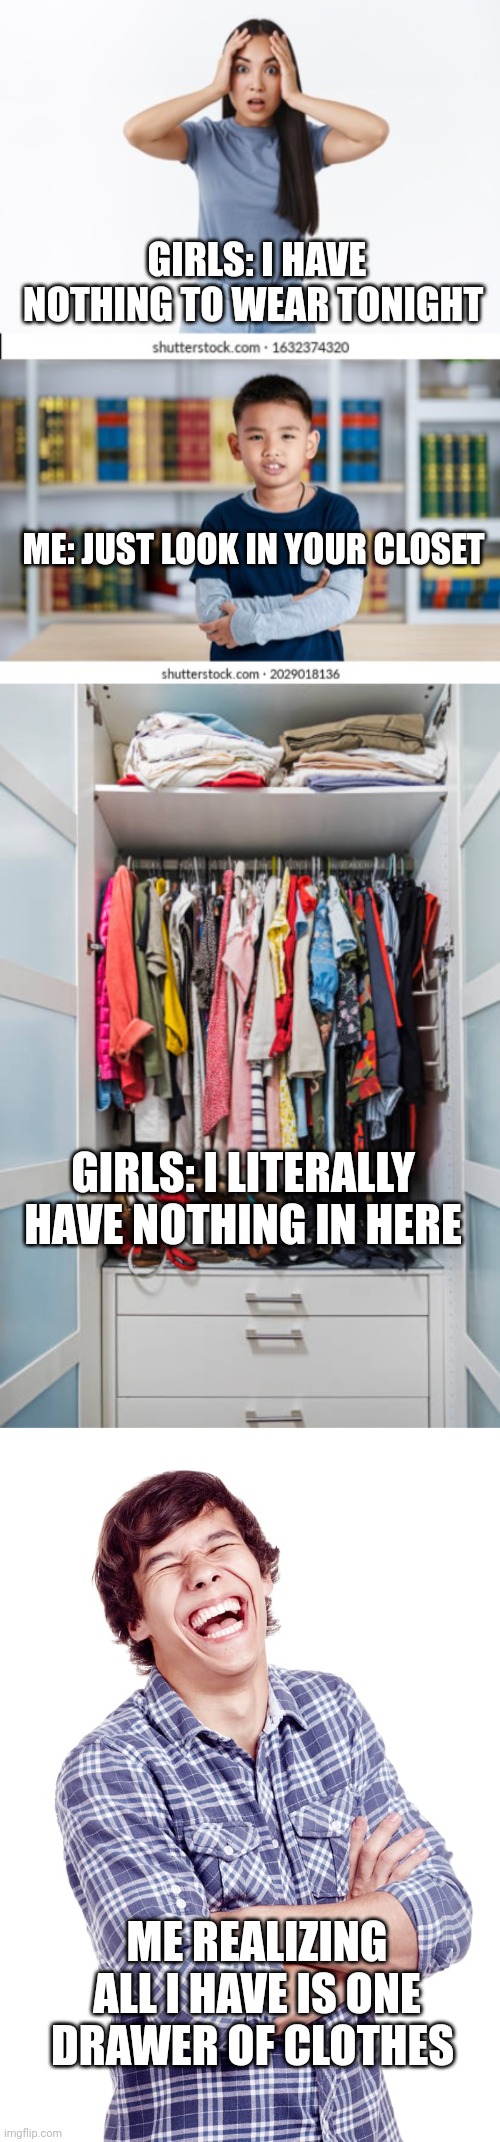 Girls be like | GIRLS: I HAVE NOTHING TO WEAR TONIGHT; ME: JUST LOOK IN YOUR CLOSET; GIRLS: I LITERALLY HAVE NOTHING IN HERE; ME REALIZING ALL I HAVE IS ONE DRAWER OF CLOTHES | image tagged in clothing | made w/ Imgflip meme maker